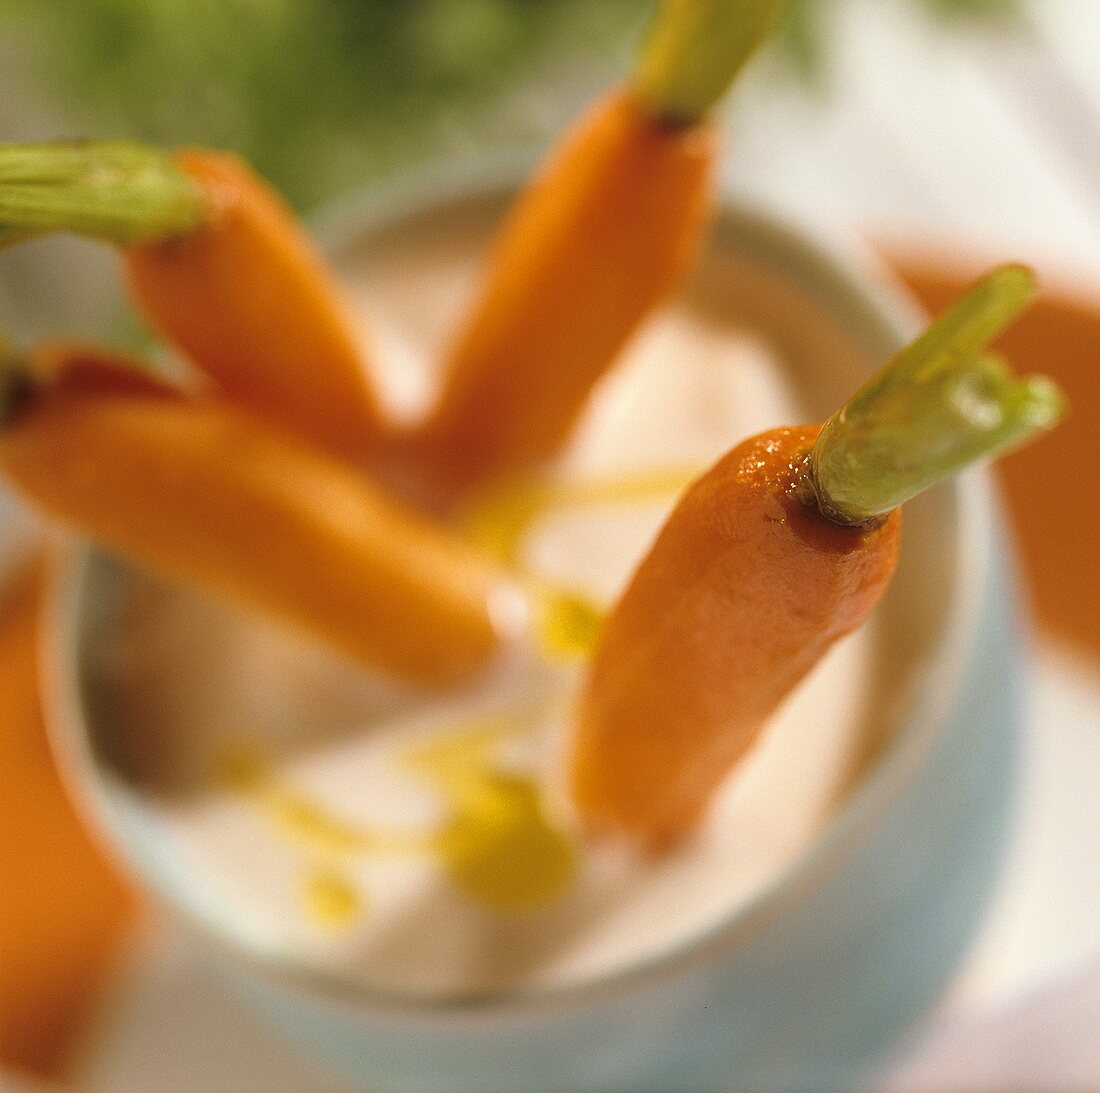 Four fried carrots with sour milk dip